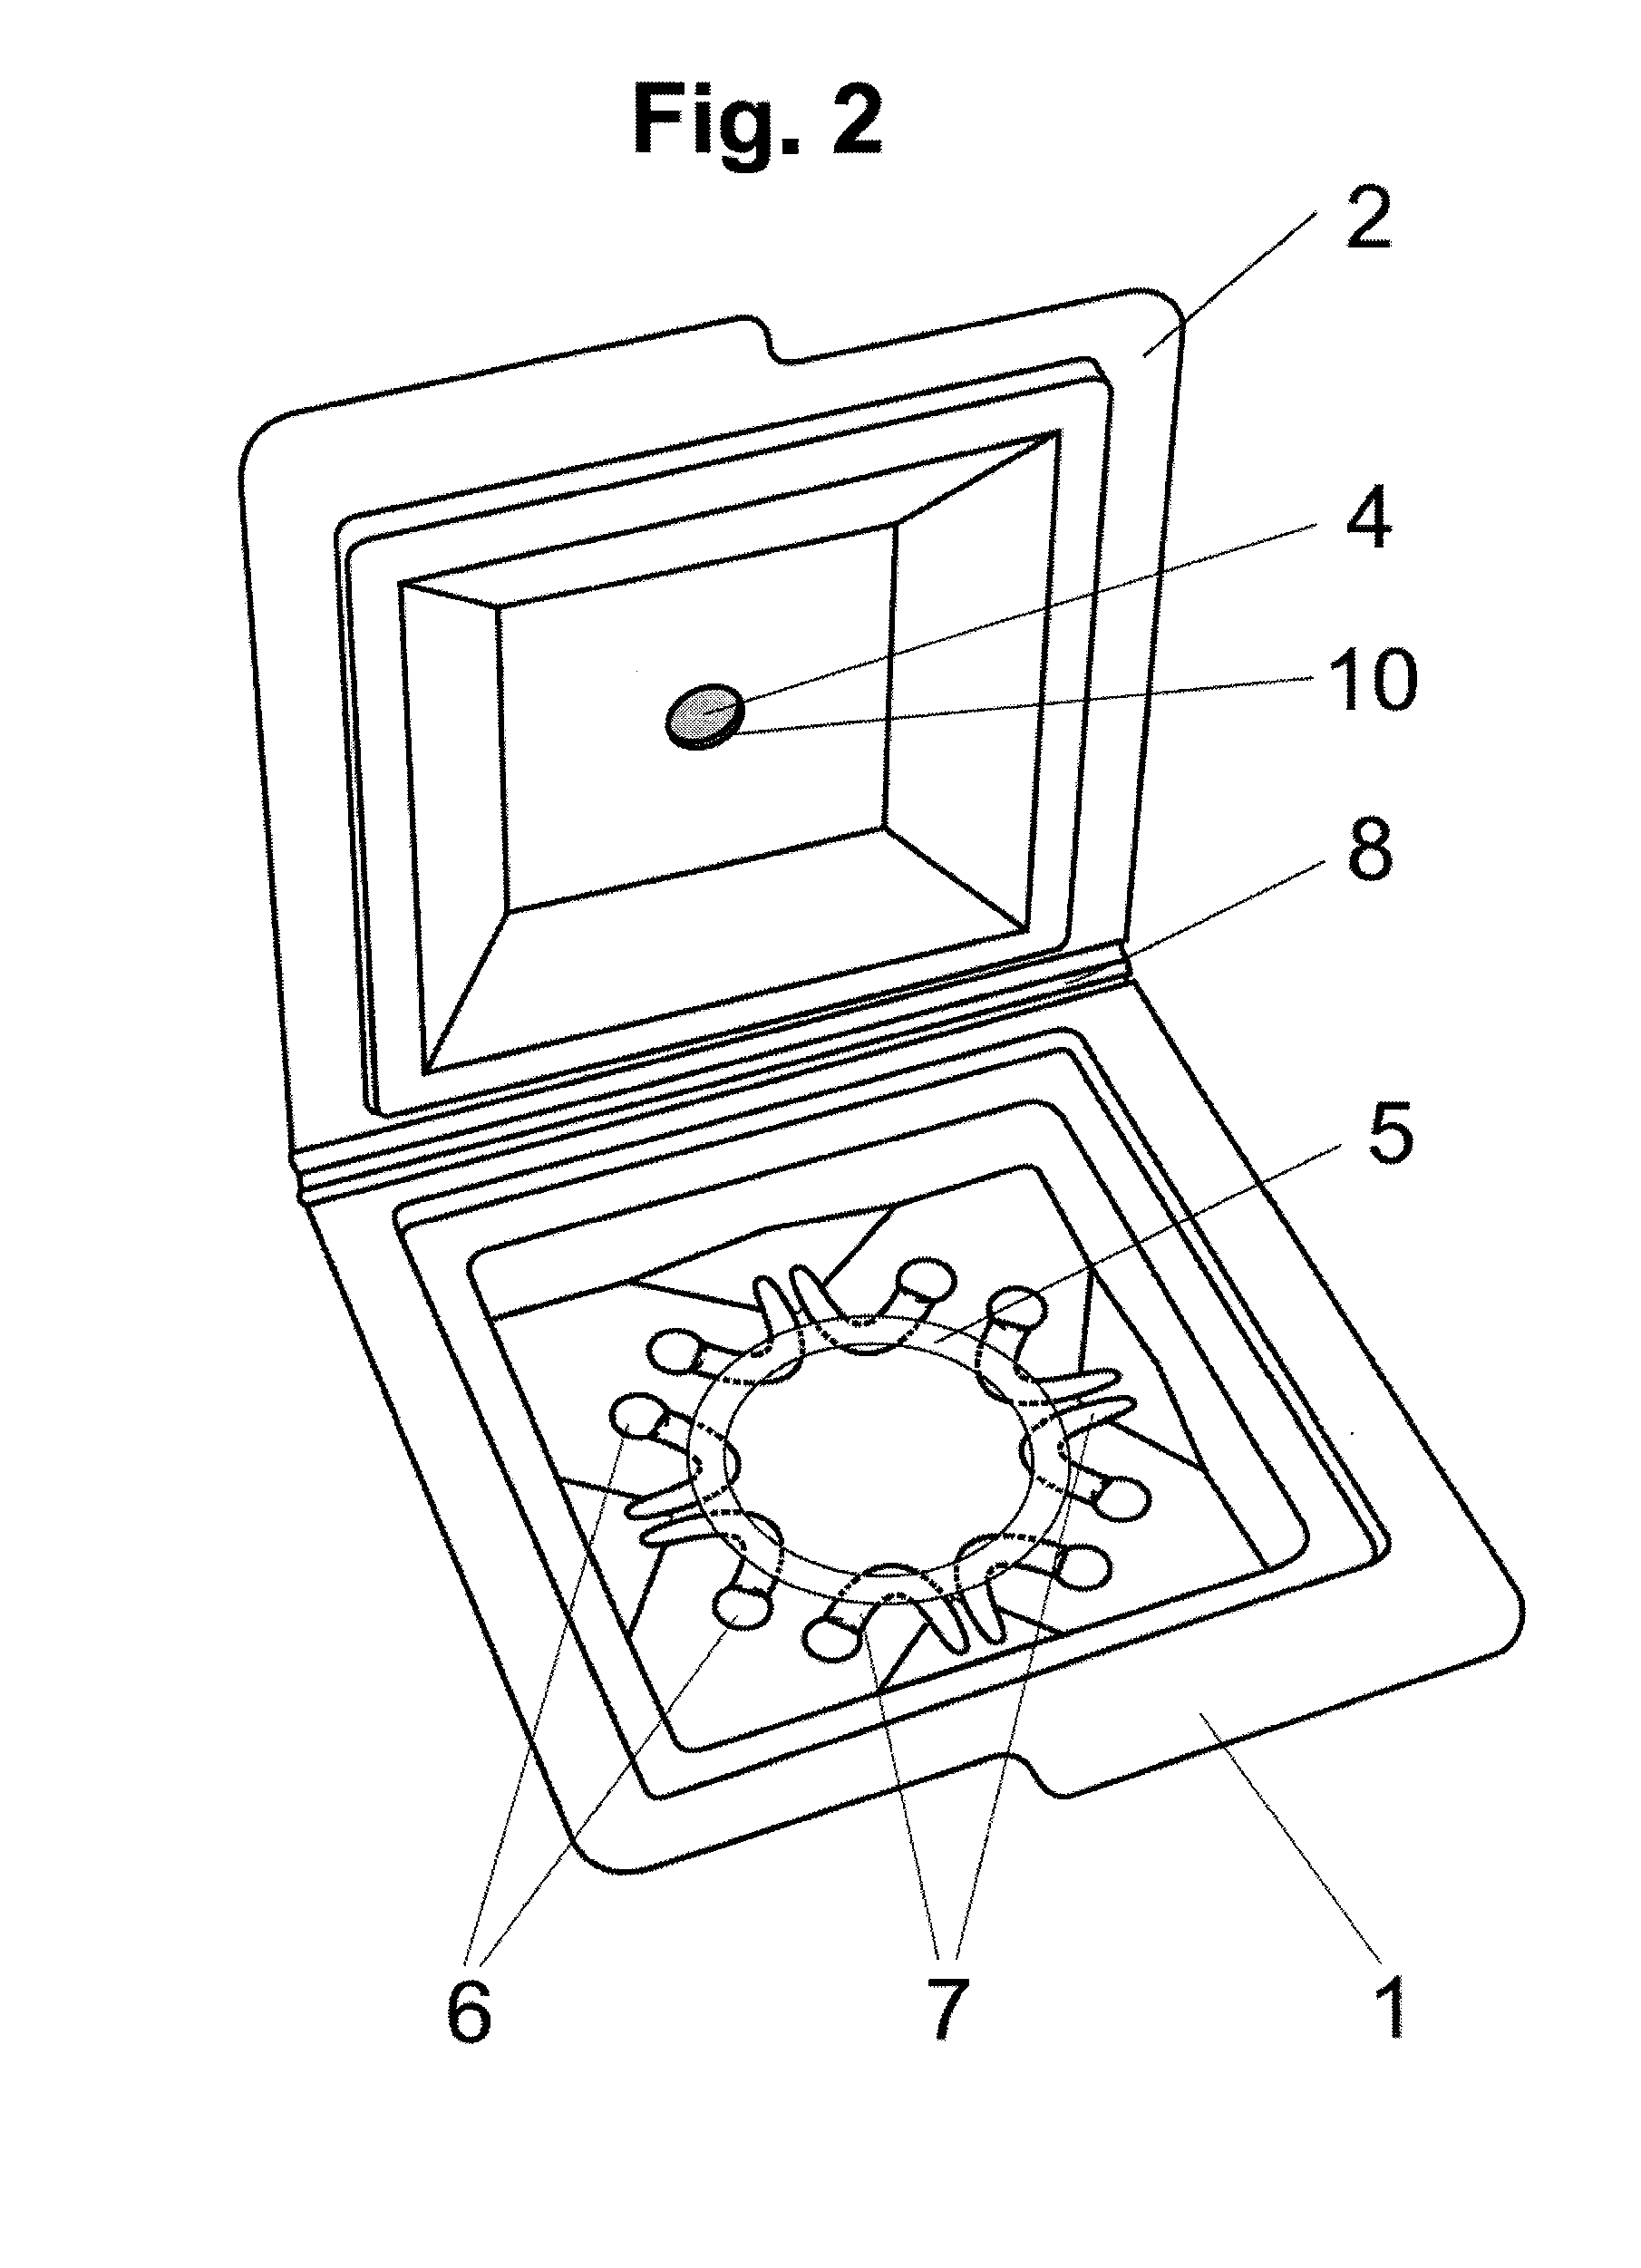 Trap for monitoring the presence of insects